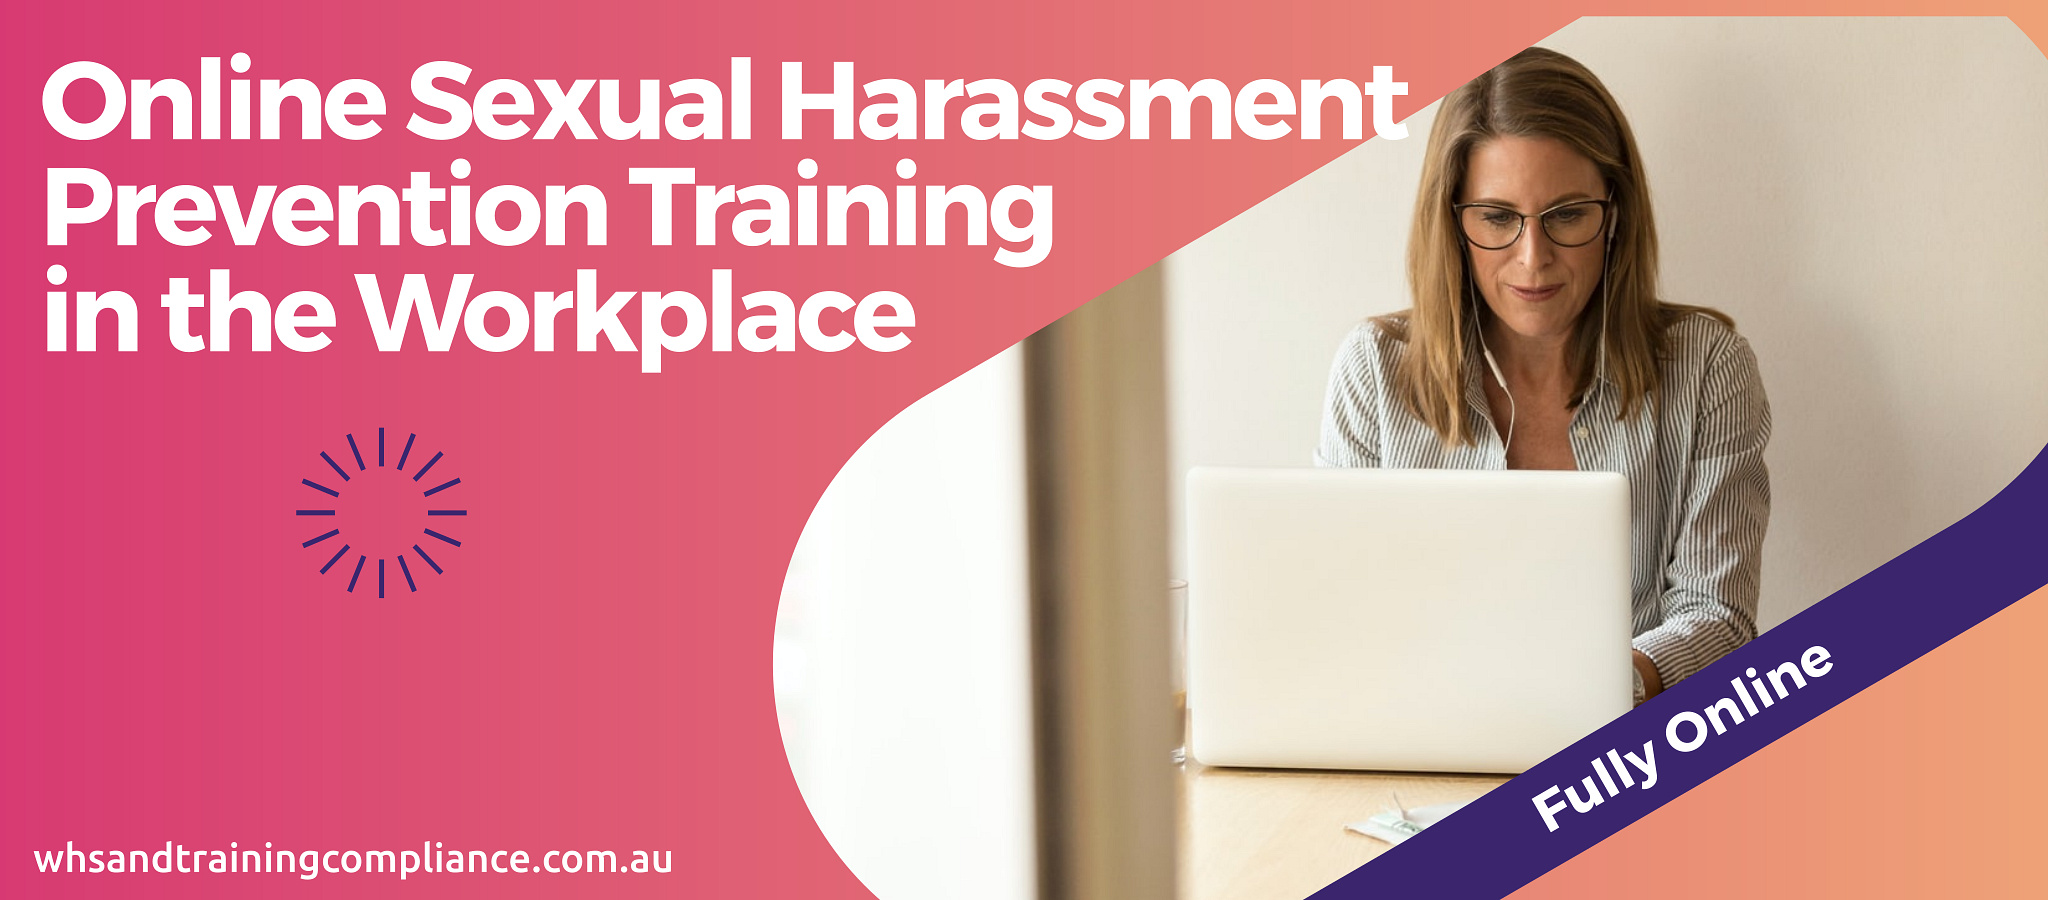 Sexual Harassment Prevention Training helps employees identify and prevent sexual harassment in the workplace. Stop sexual abuse.